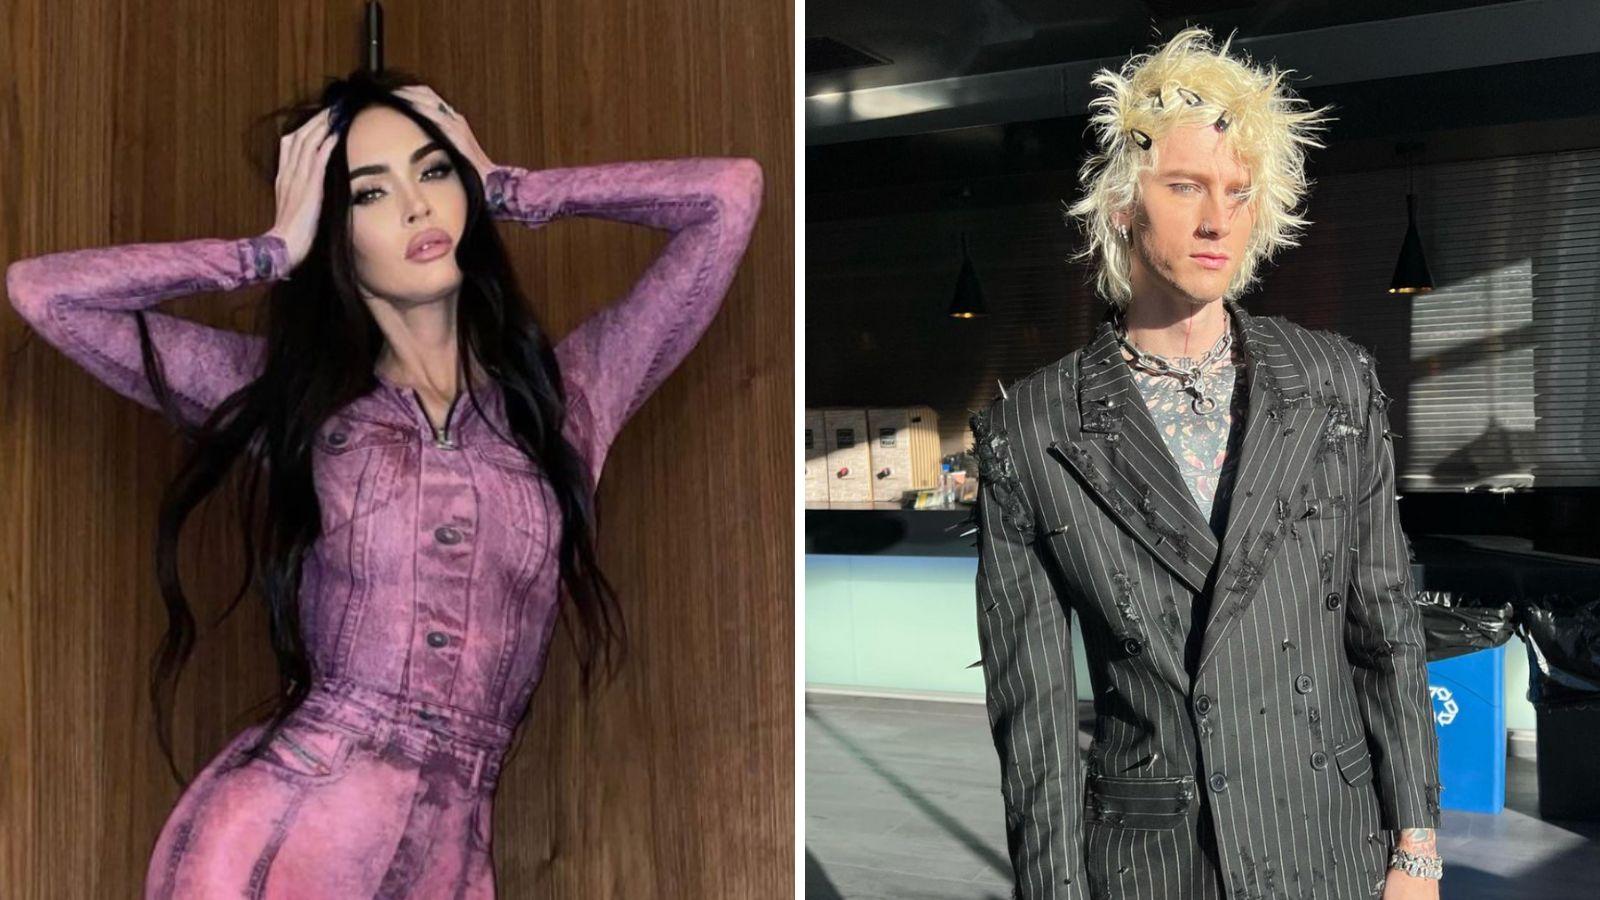 Megan Fox removes Machine Gun Kelly from IG and quotes Beyonce song about cheating